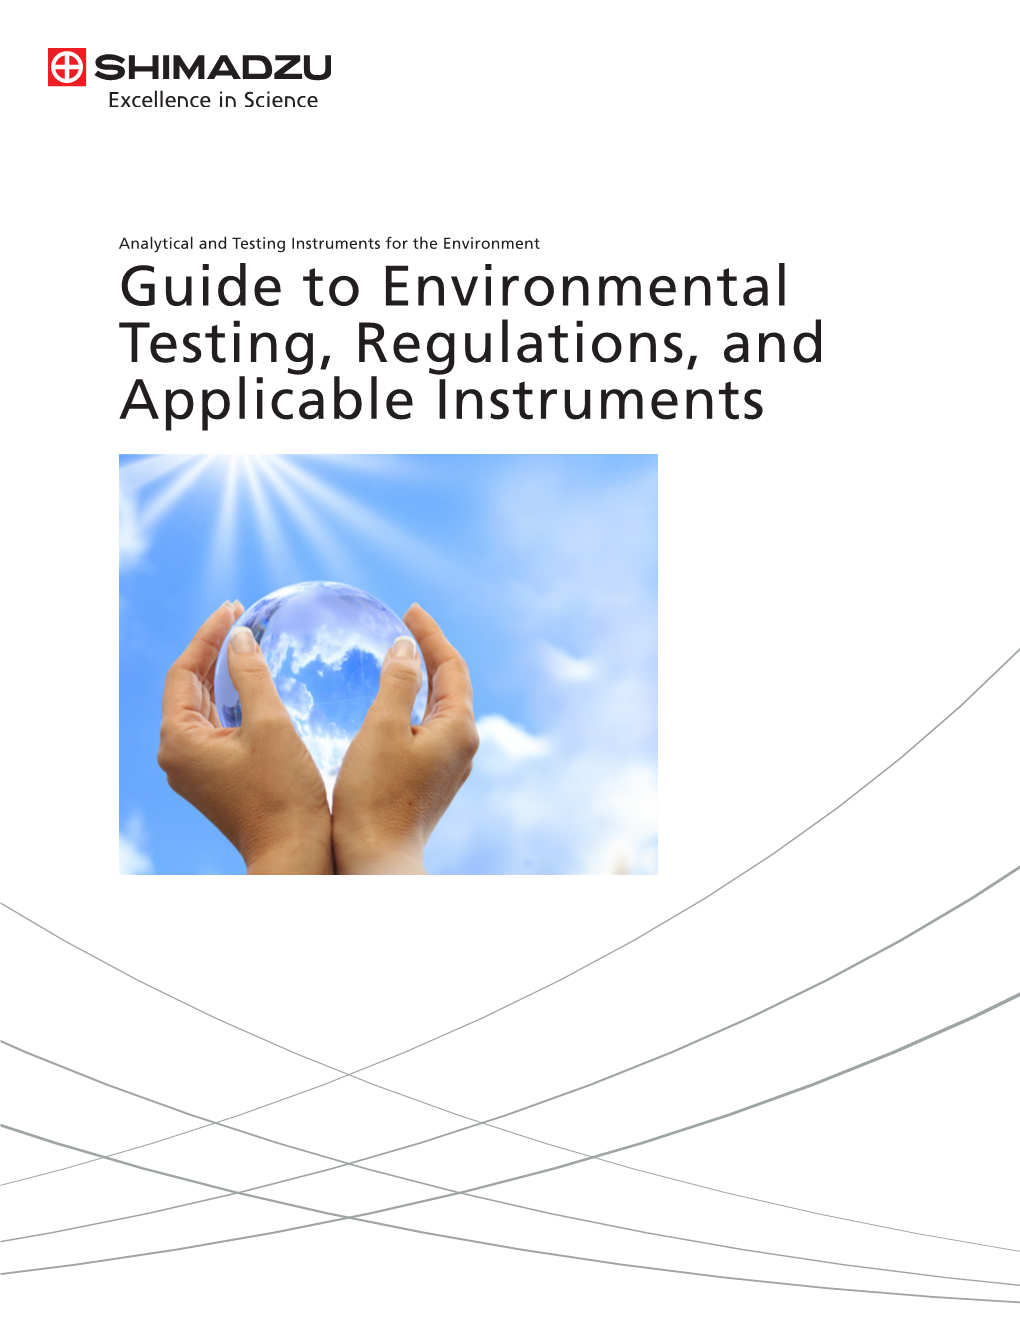 Guide to Environmental Testing, Regulations, and Applicable Instruments World Map of Shimadzu Sales, Service, Manufacturing, and R&D Facilities